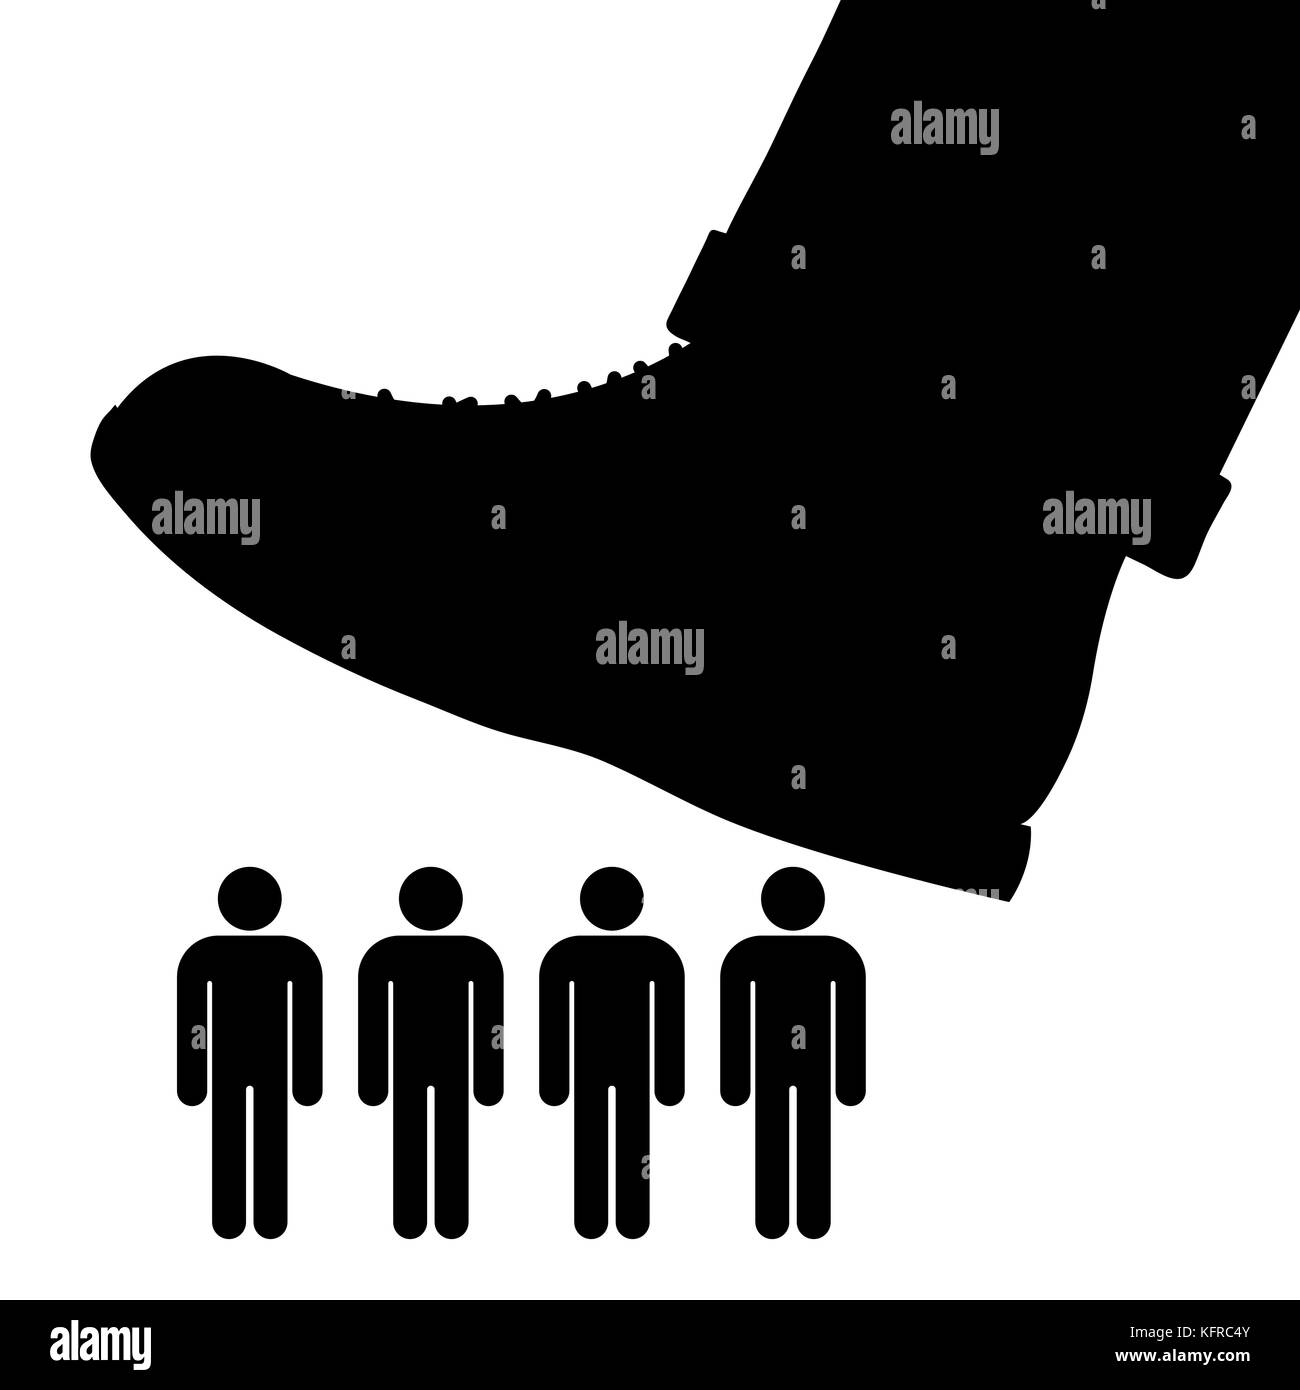 A big foot in shoe is going to crush a group of people - vector illustration Stock Vector